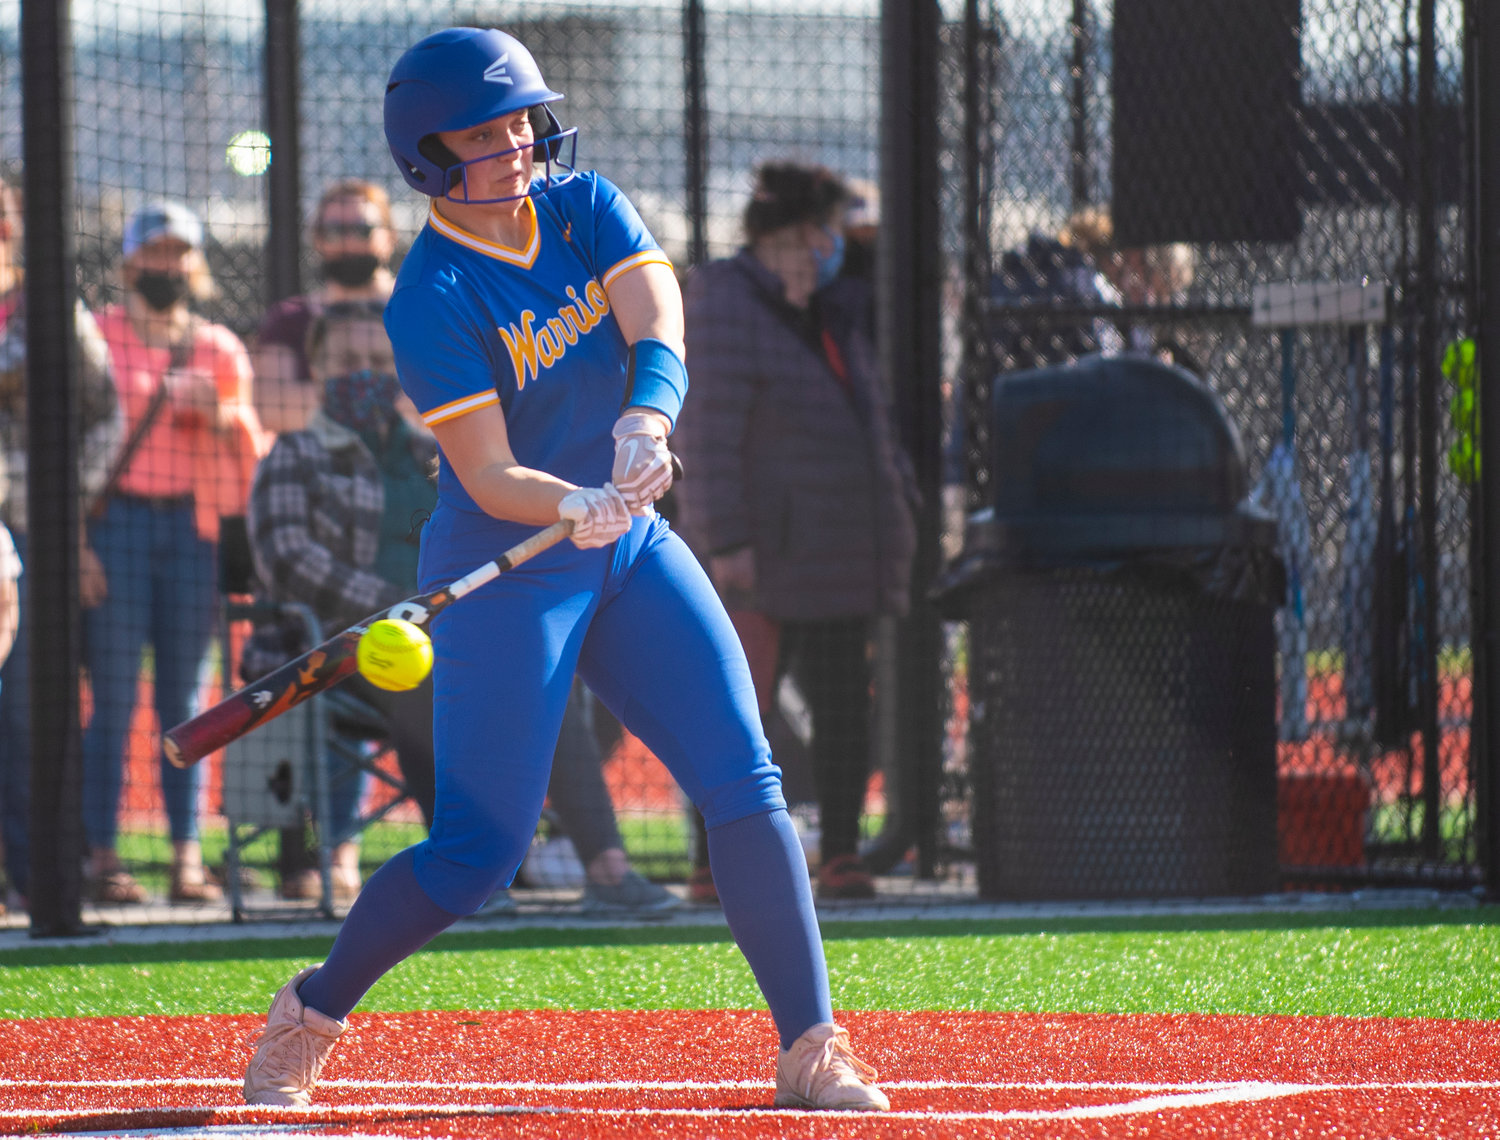 Rochester's No. 11 swings at a W.F. West pitch during the Warriors' road matchup on Wednesday.